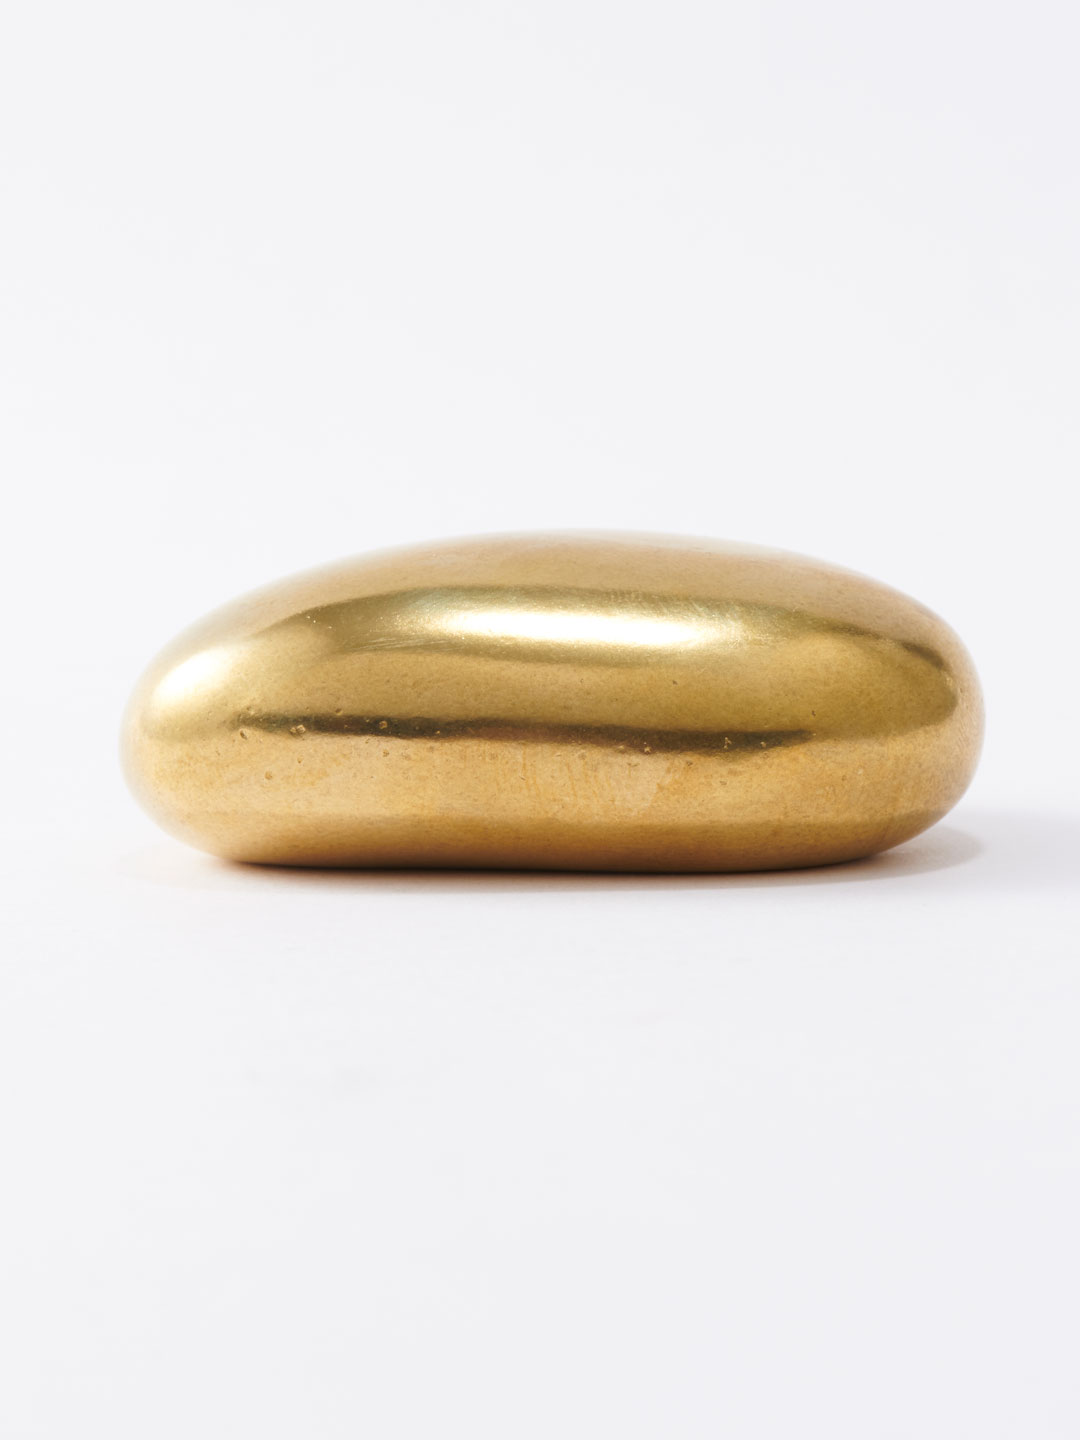 Paper Weight 004 - Gold